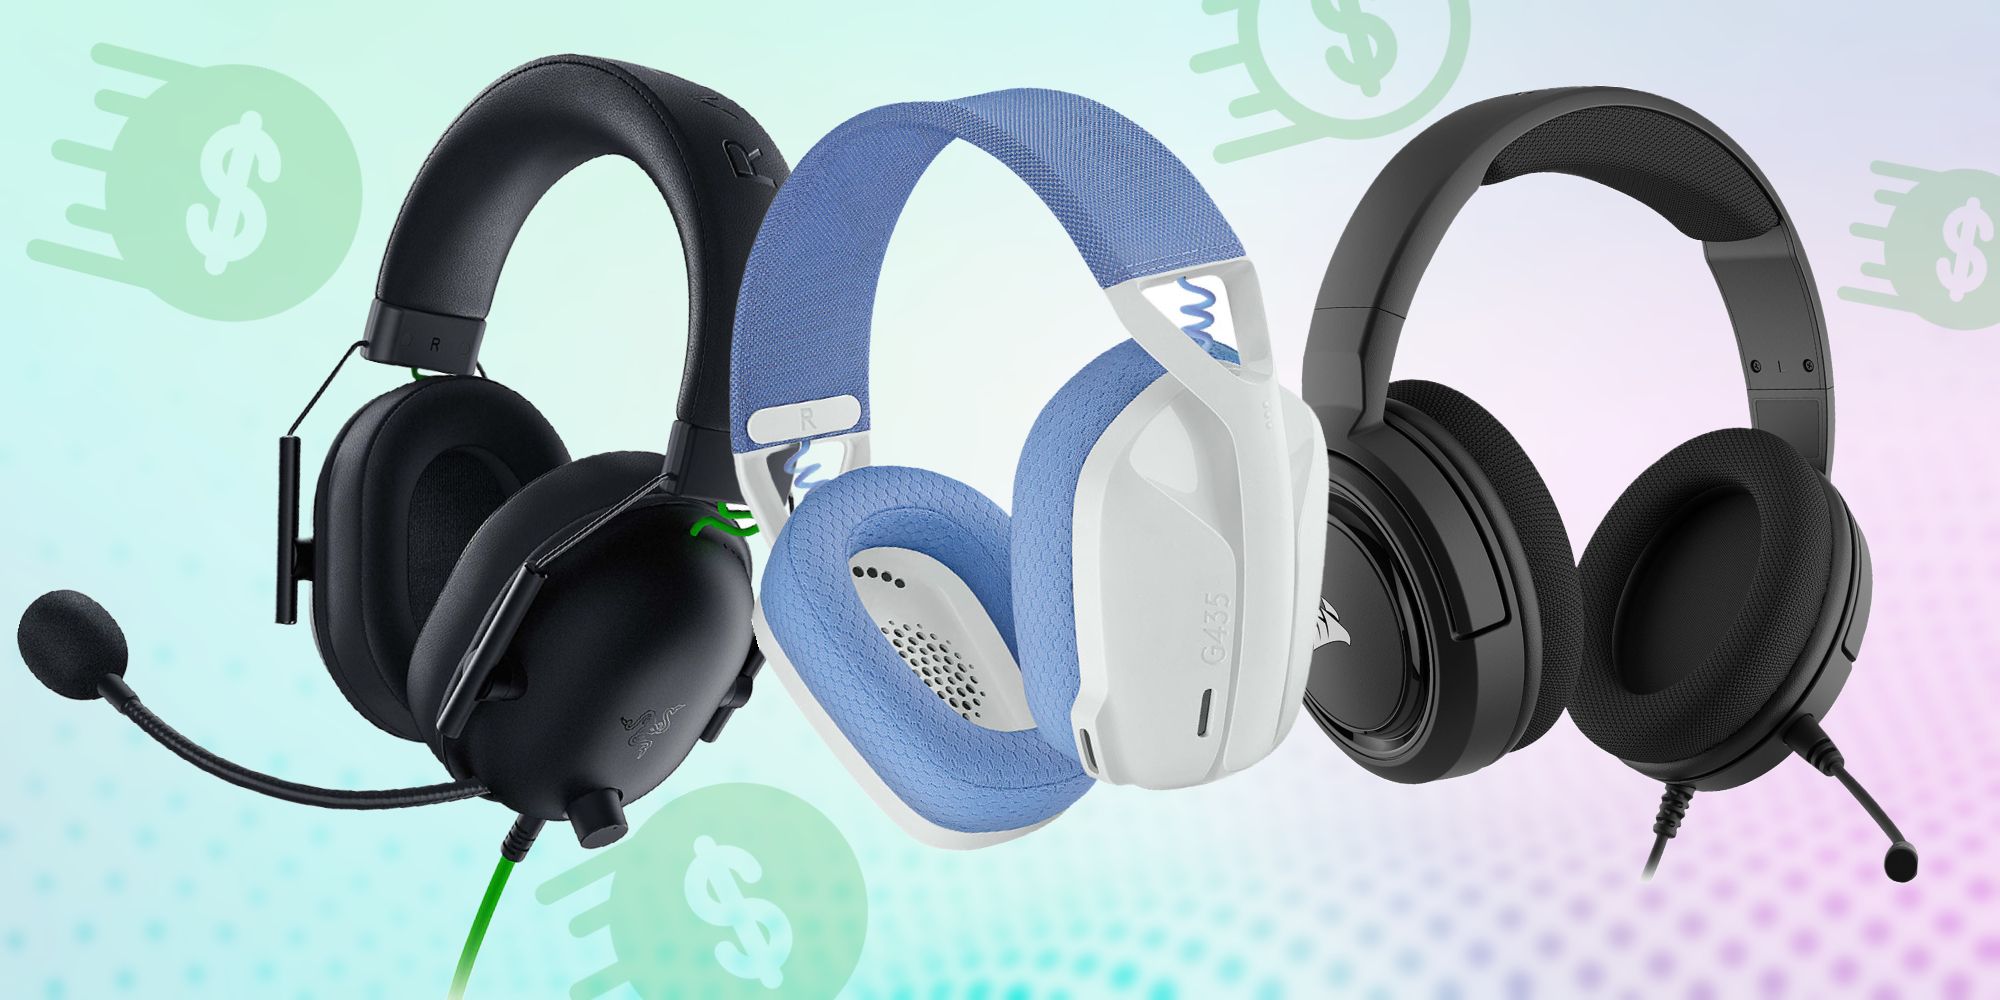 Three gaming headsets, two black and one white, are pictured surrounded by money signs.